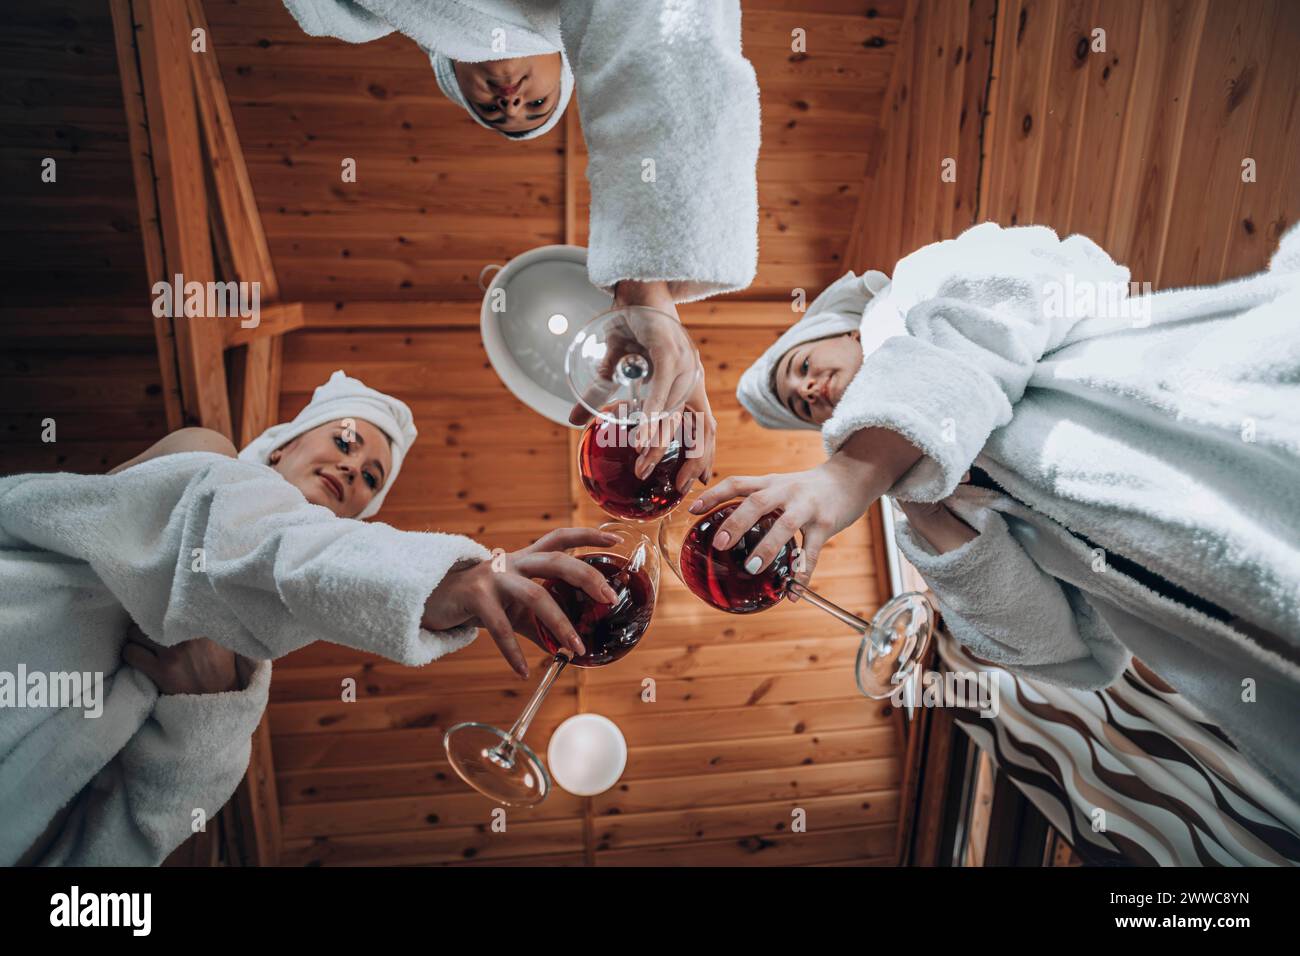 Friends wearing bathrobes and toasting wine at sauna Stock Photo